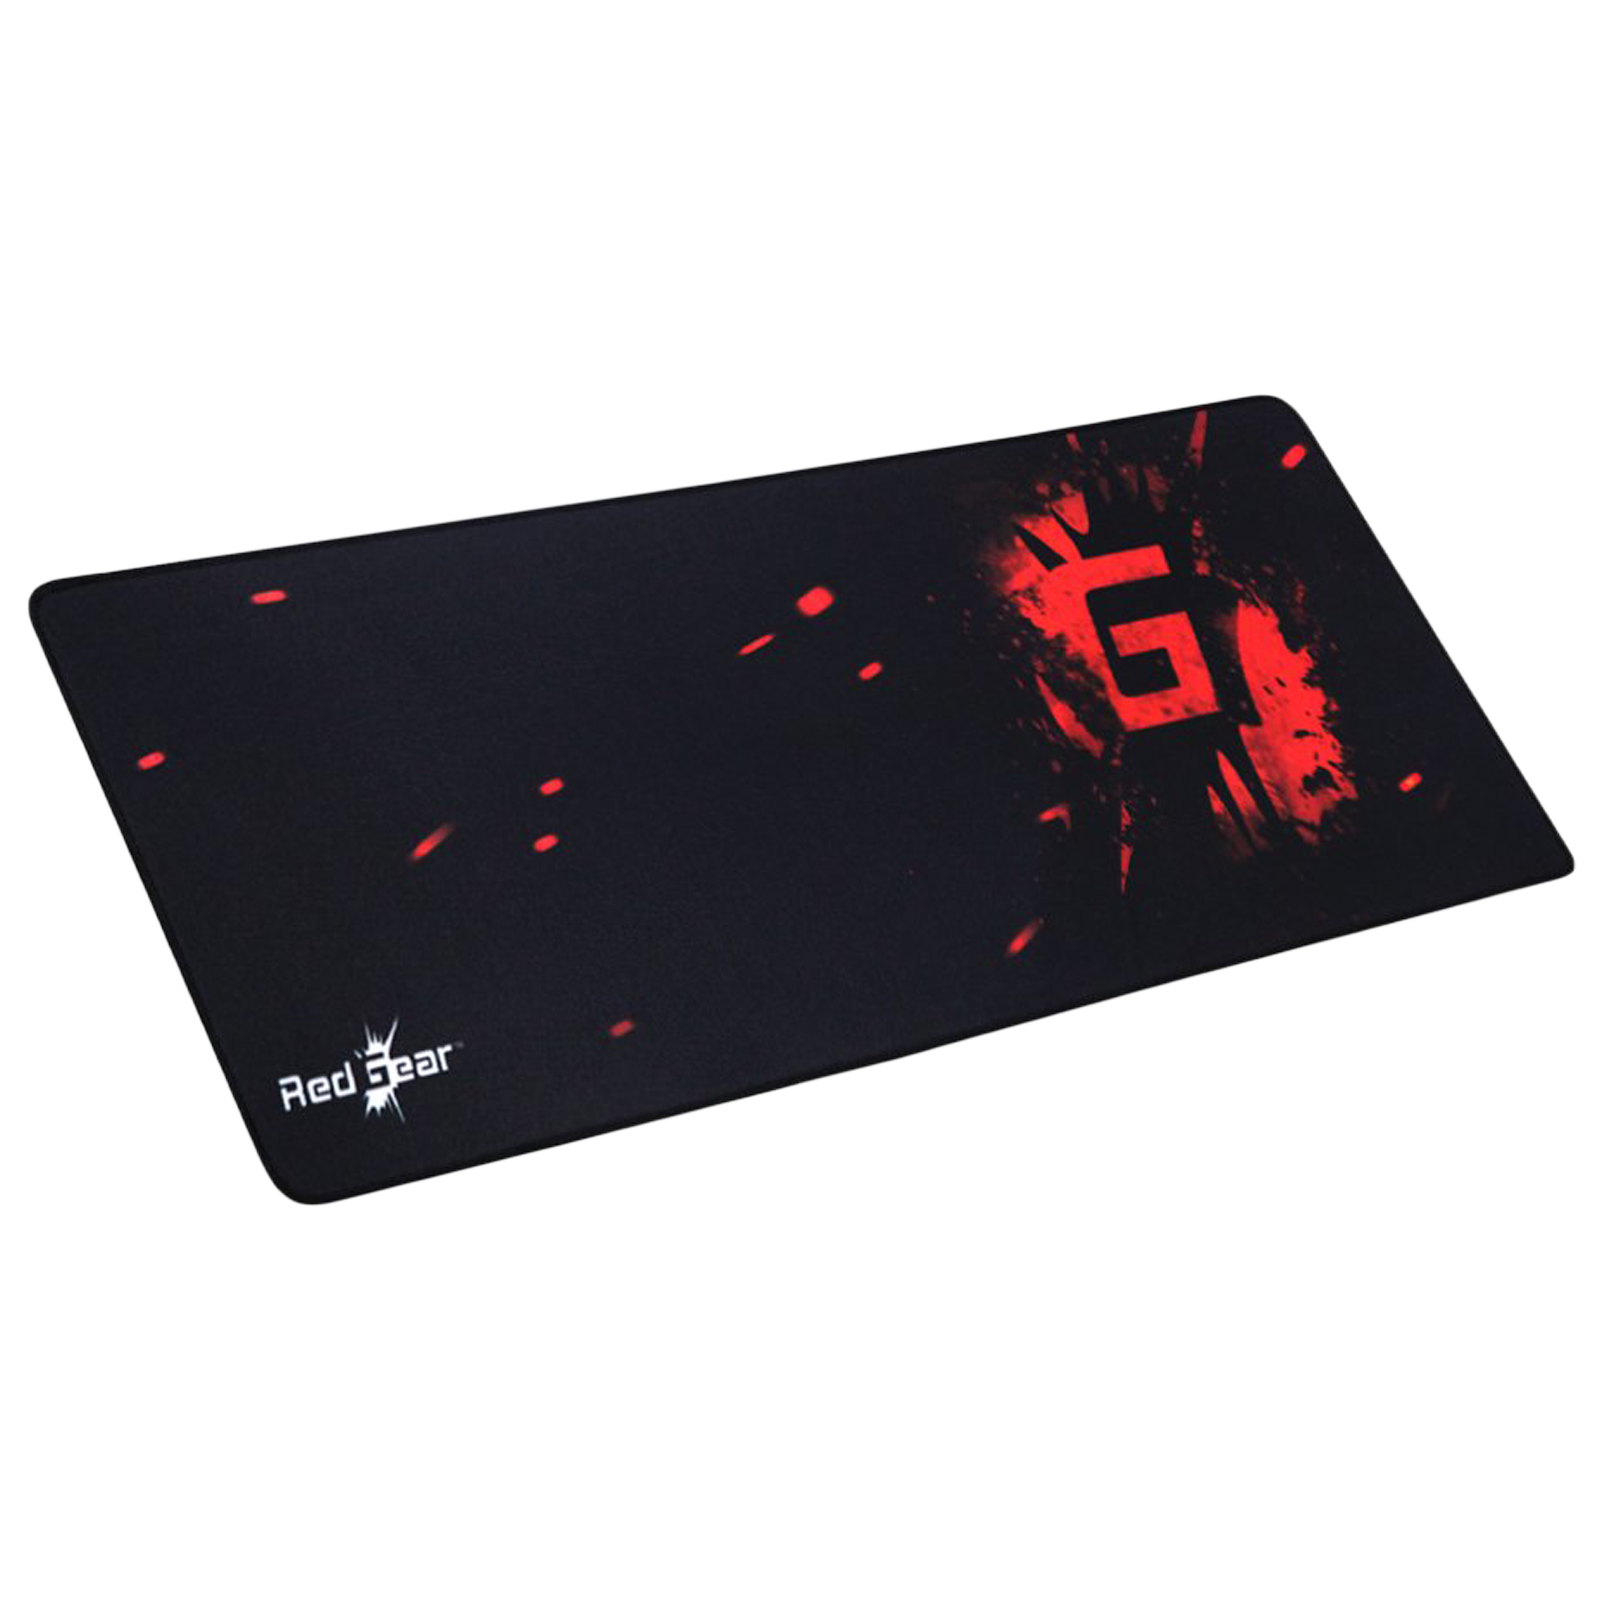 Redgear MP80 Gaming Mouse Pad (Soft And Durable, 8904130838156, Black)_1